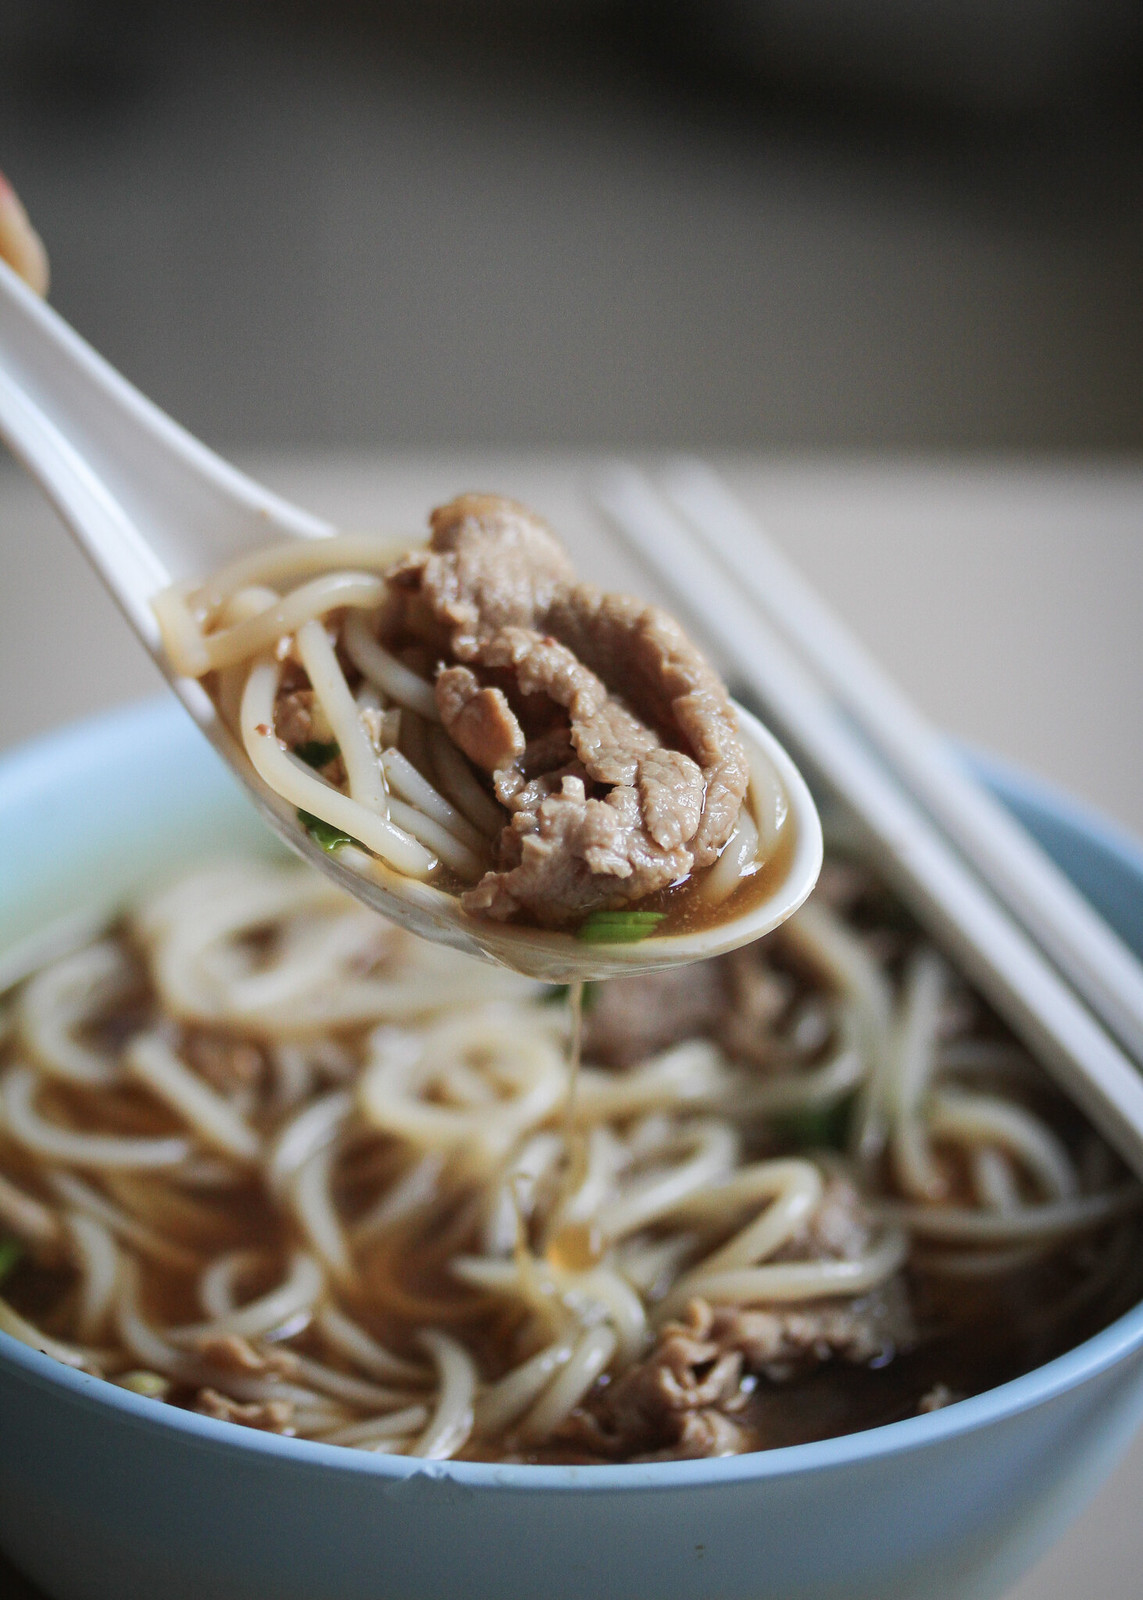 Toa Payoh Hwa Heng Beef Noodle Spoonful of Soup Version